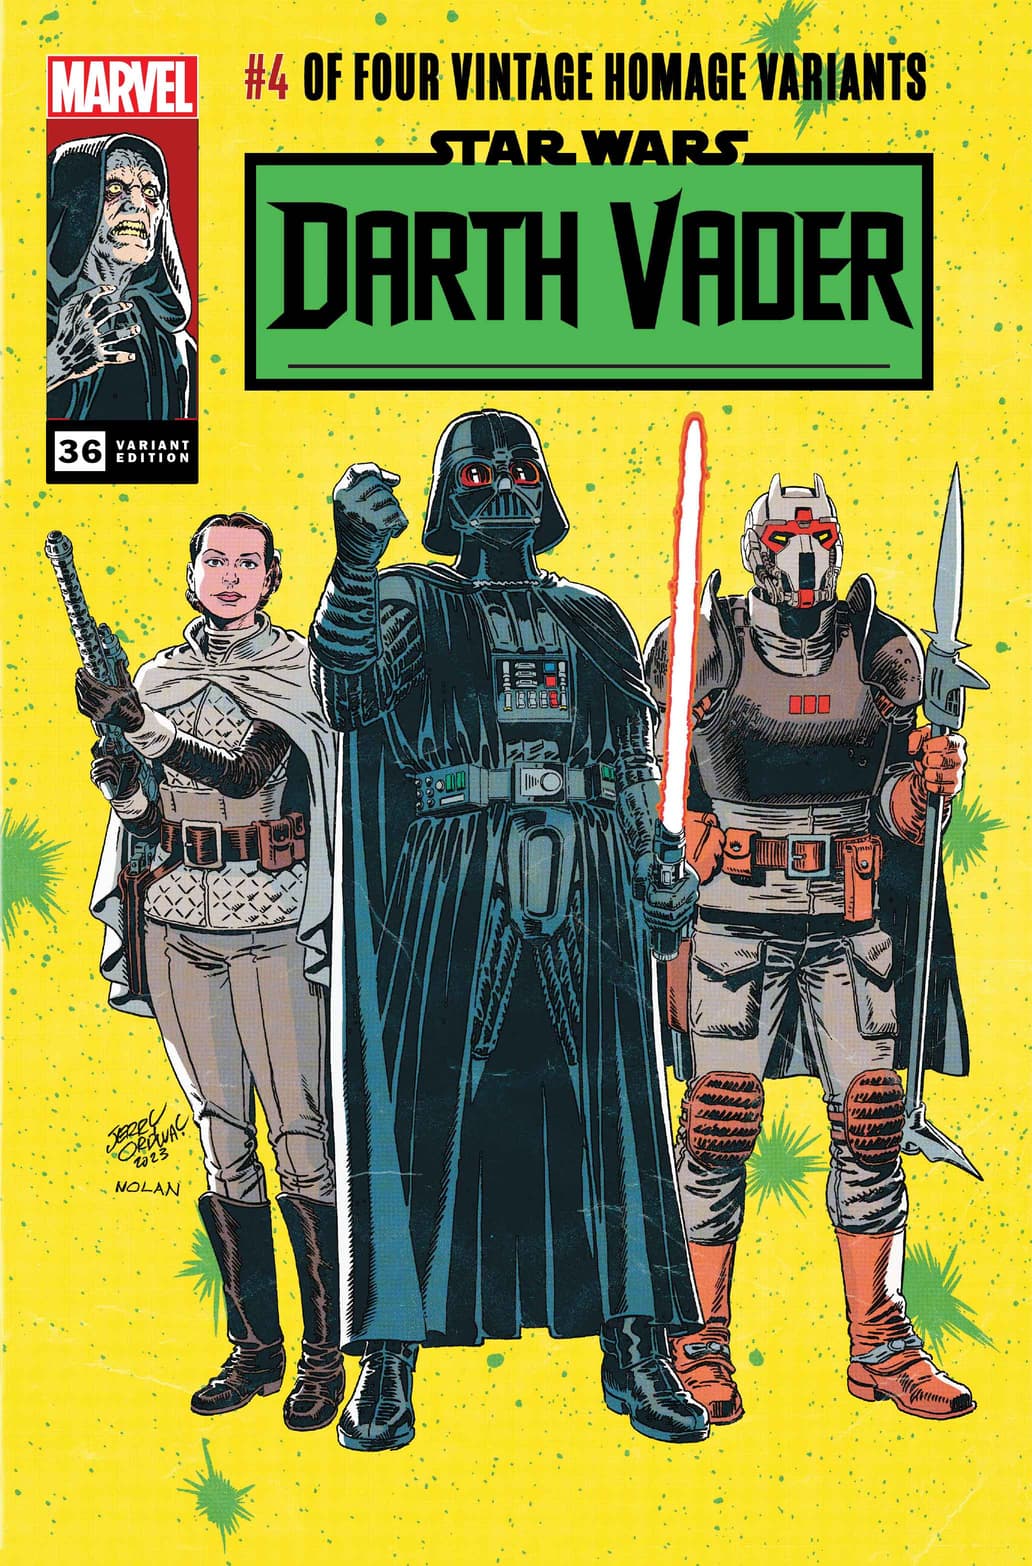 STAR WARS: DARTH VADER #36 Classic Trade Dress Variant Cover by Jerry Ordway and Nolan Woodward